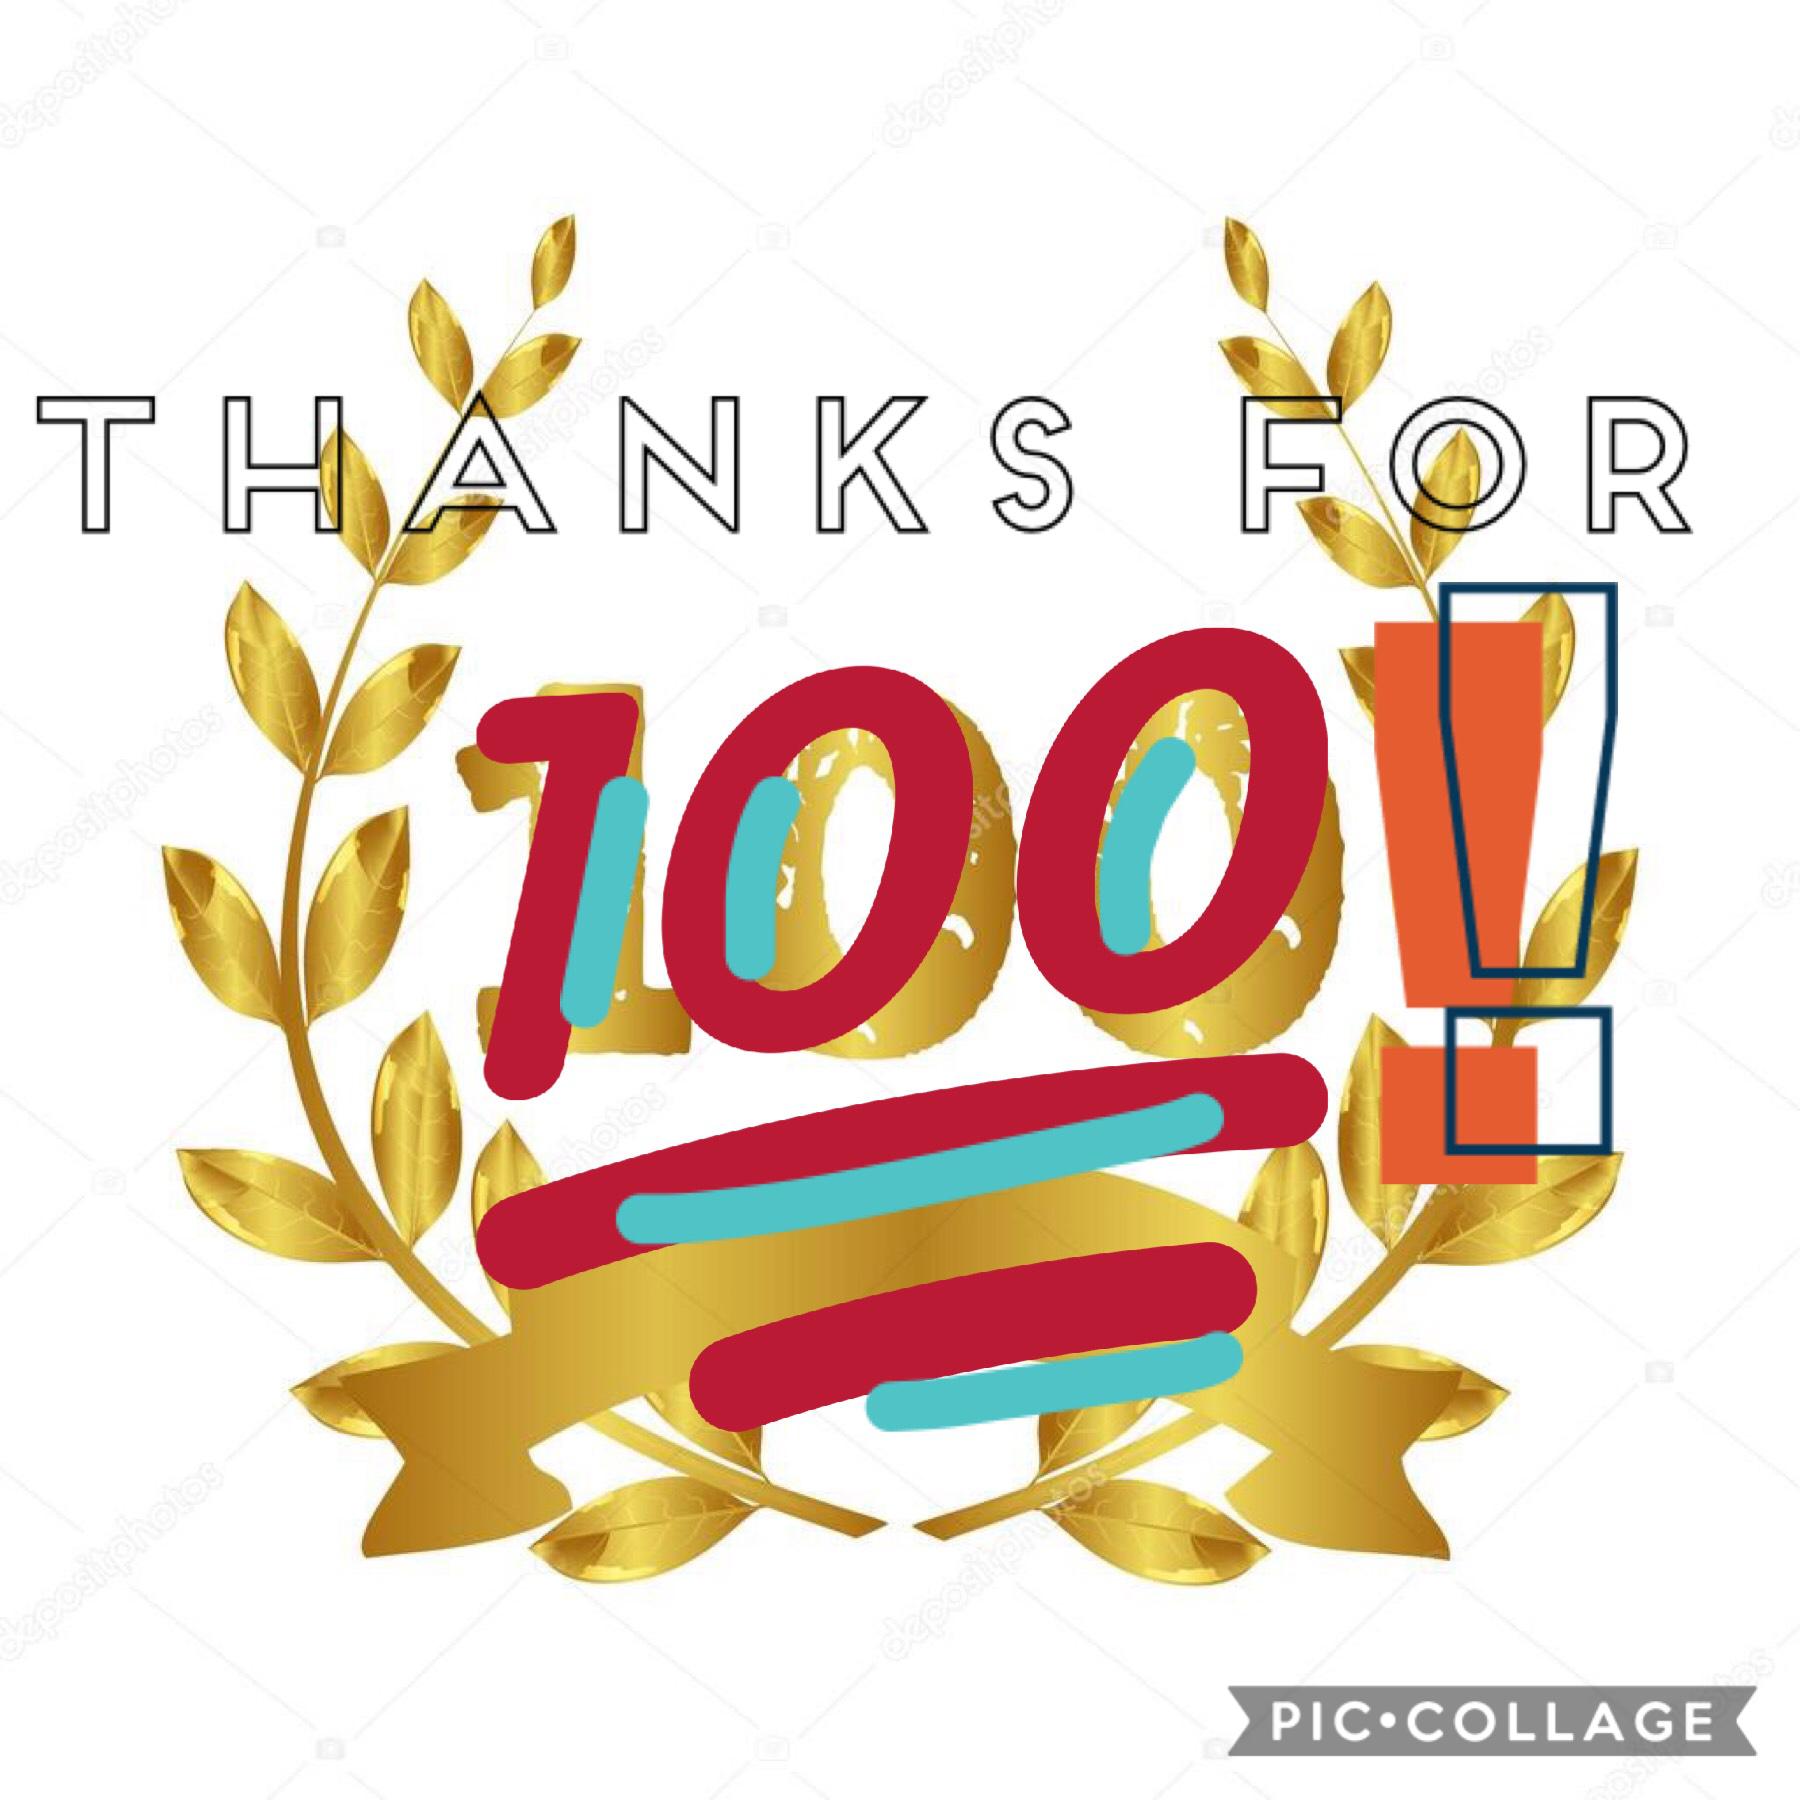 Hey peeps!! Thank you very much for 💯 followers!!! Stay awesome!! 😃